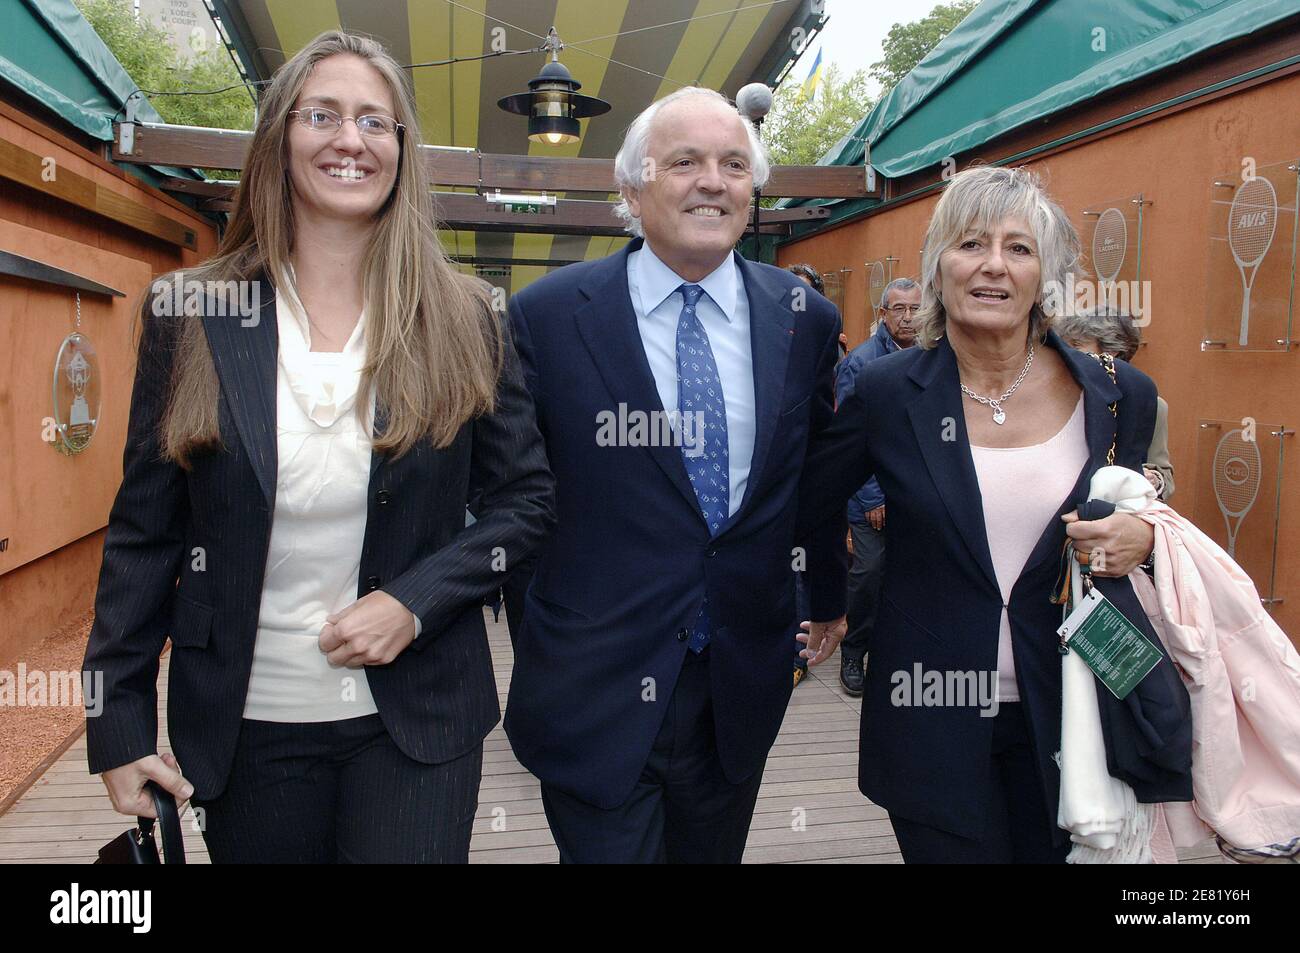 Mary Pierce and President of French Tennis Federation Christian Bimes arrive in the 'Village', the VIP area of the French Open at Roland Garros arena in Paris, France on May 30, 2007. Photo by ABACAPRESS.COM Stock Photo